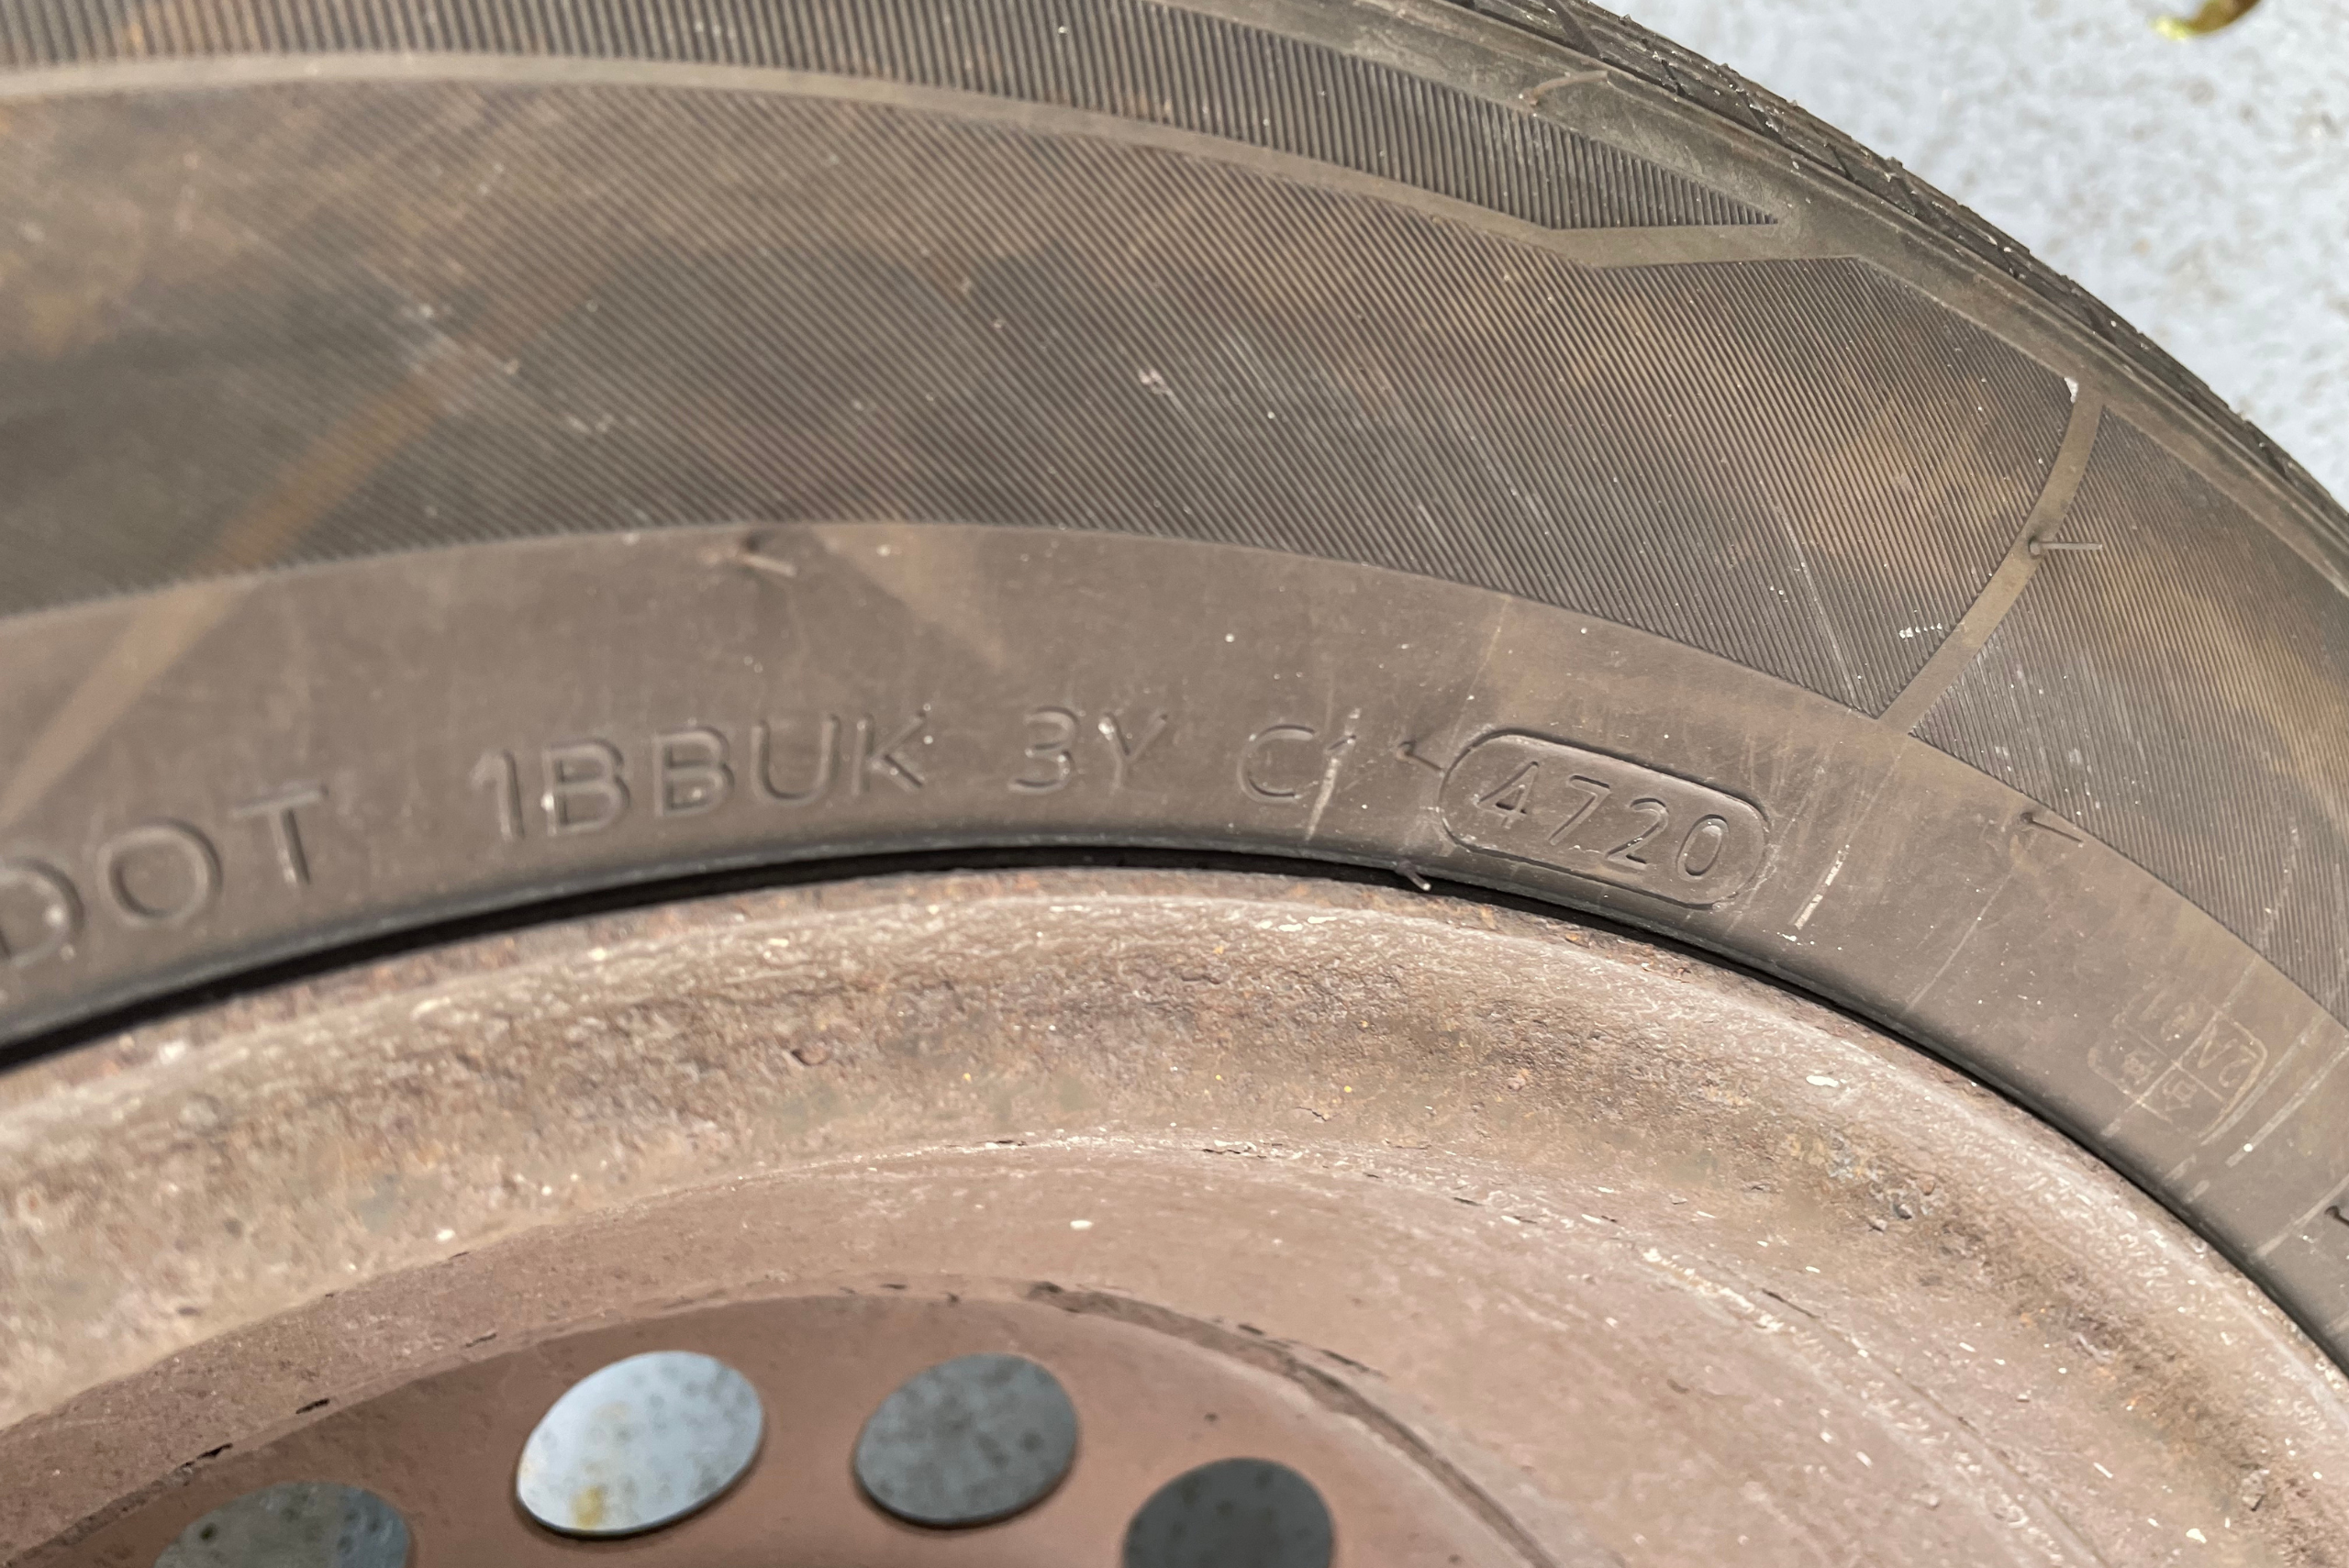 A closeup of a tire, showing manufacturing date stamp.